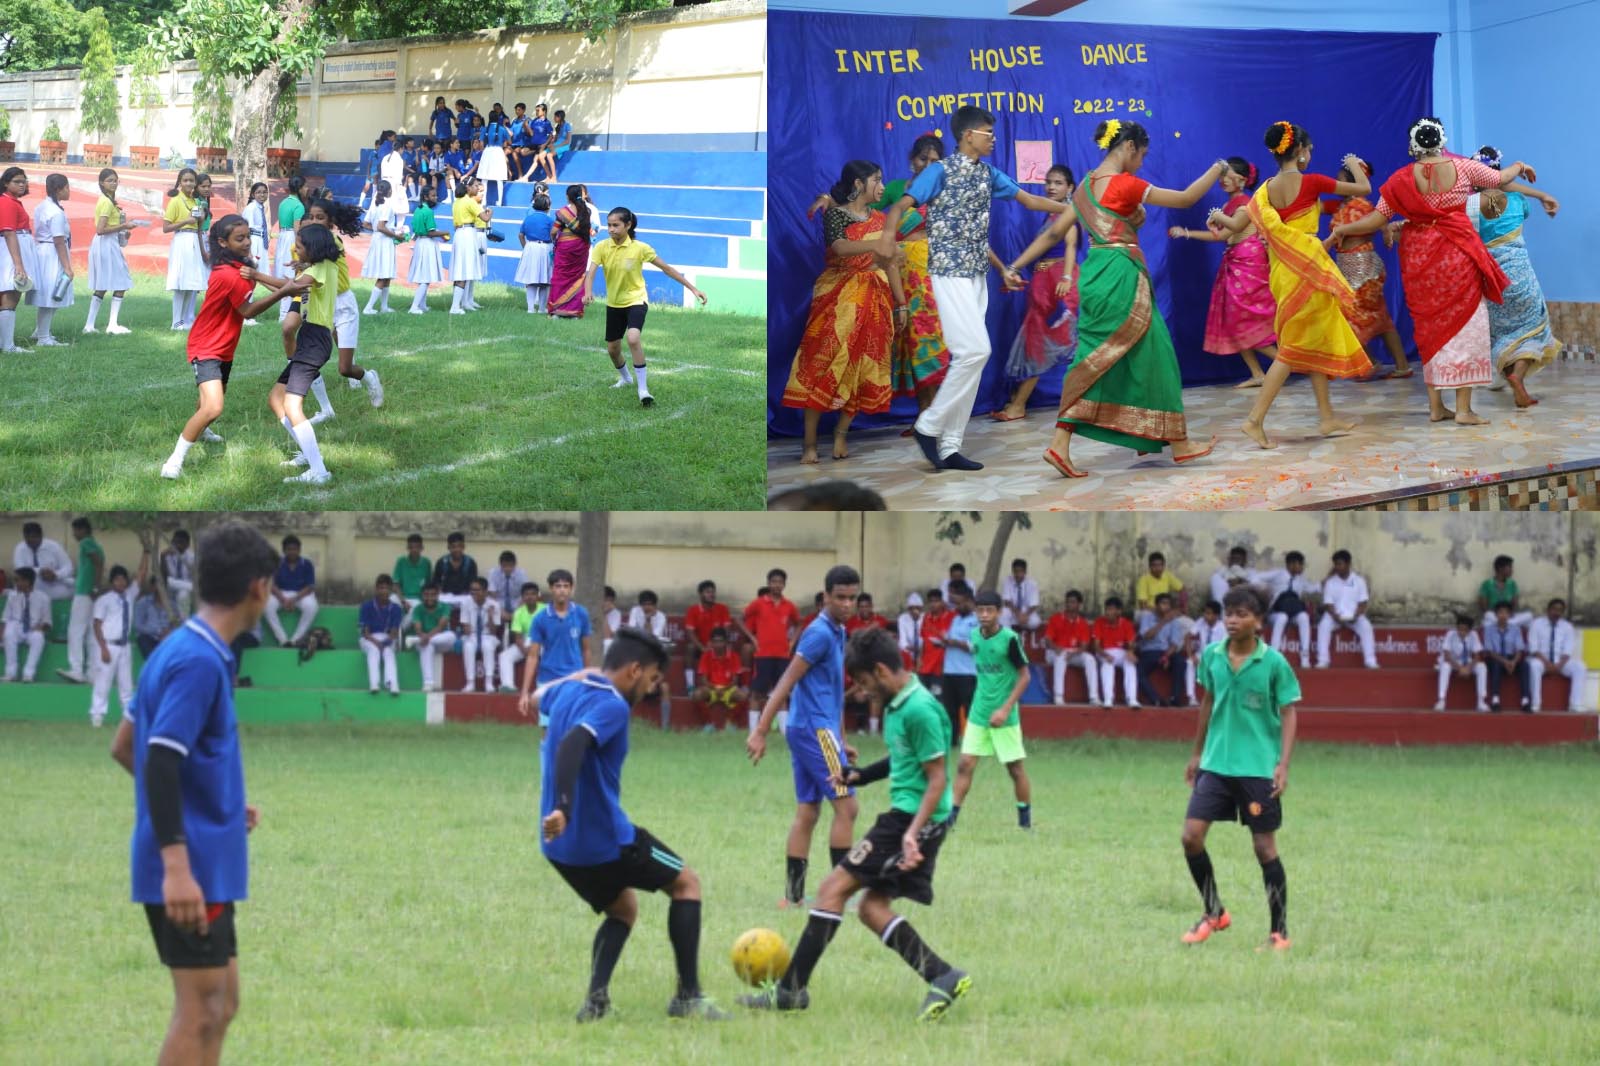 20220707~Inter House Competition (7th July 2022) Thumbnails